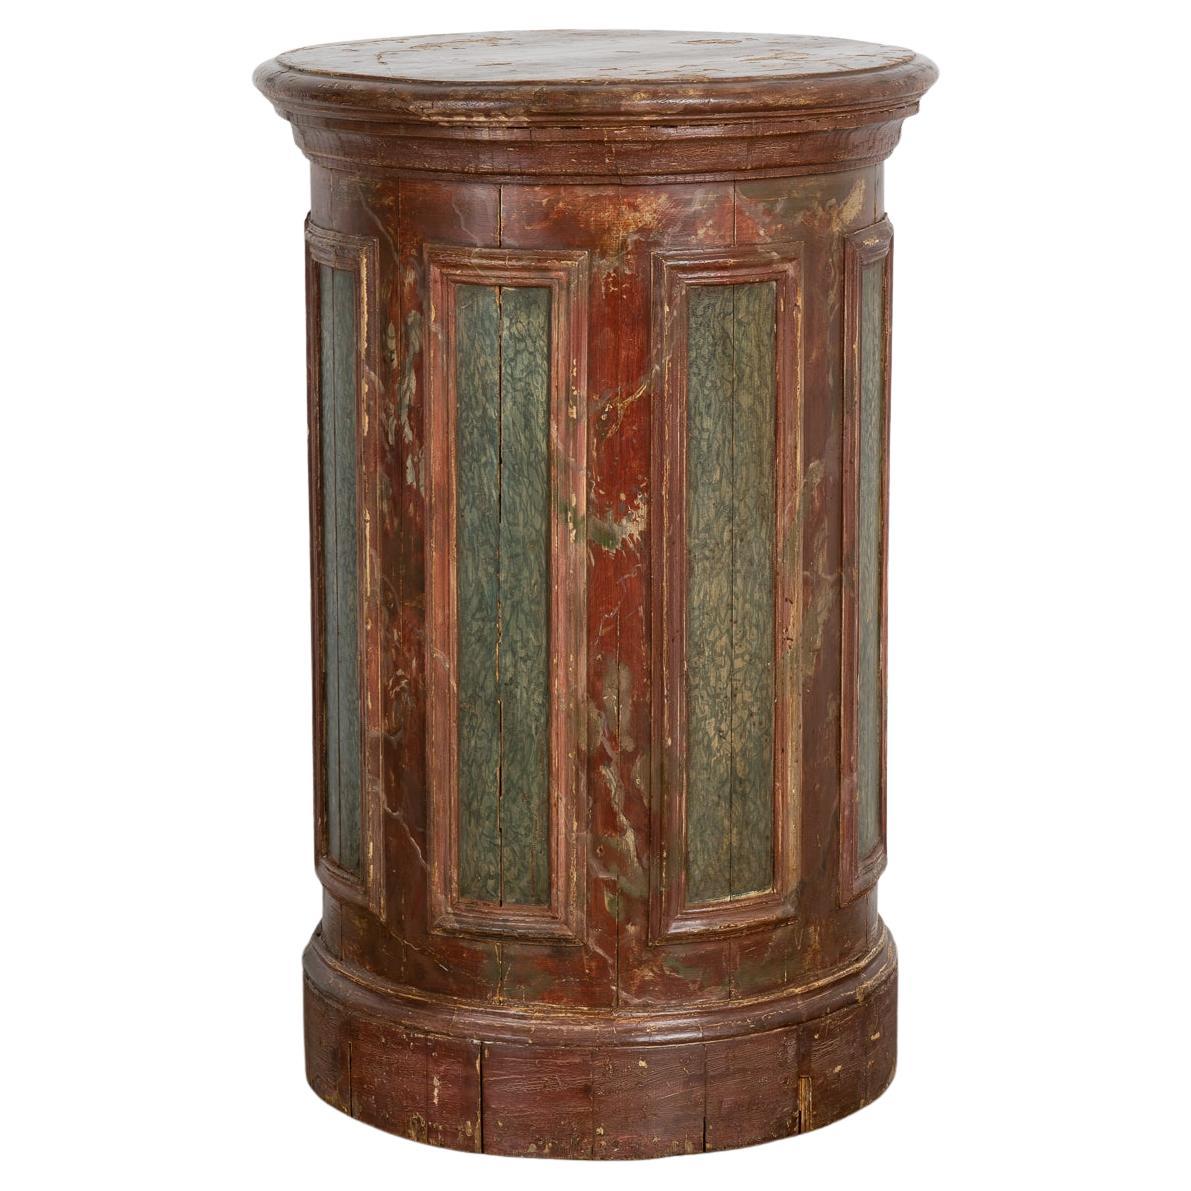 Antique Red Painted Wood Display Pedestal from Sweden, circa 1840-1860 For Sale